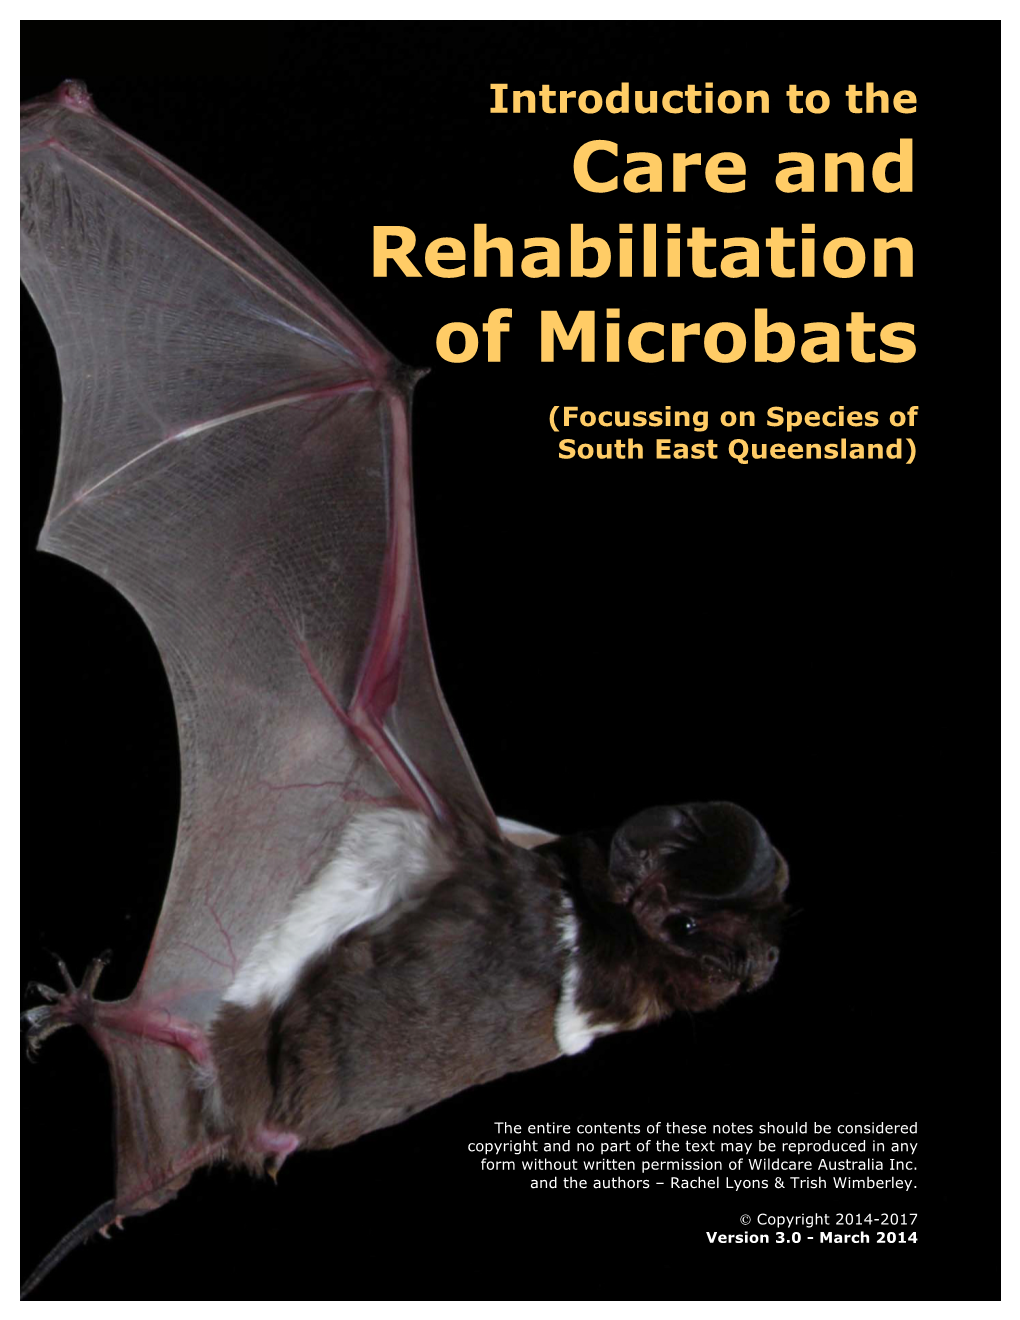 Care and Rehabilitation of Microbats